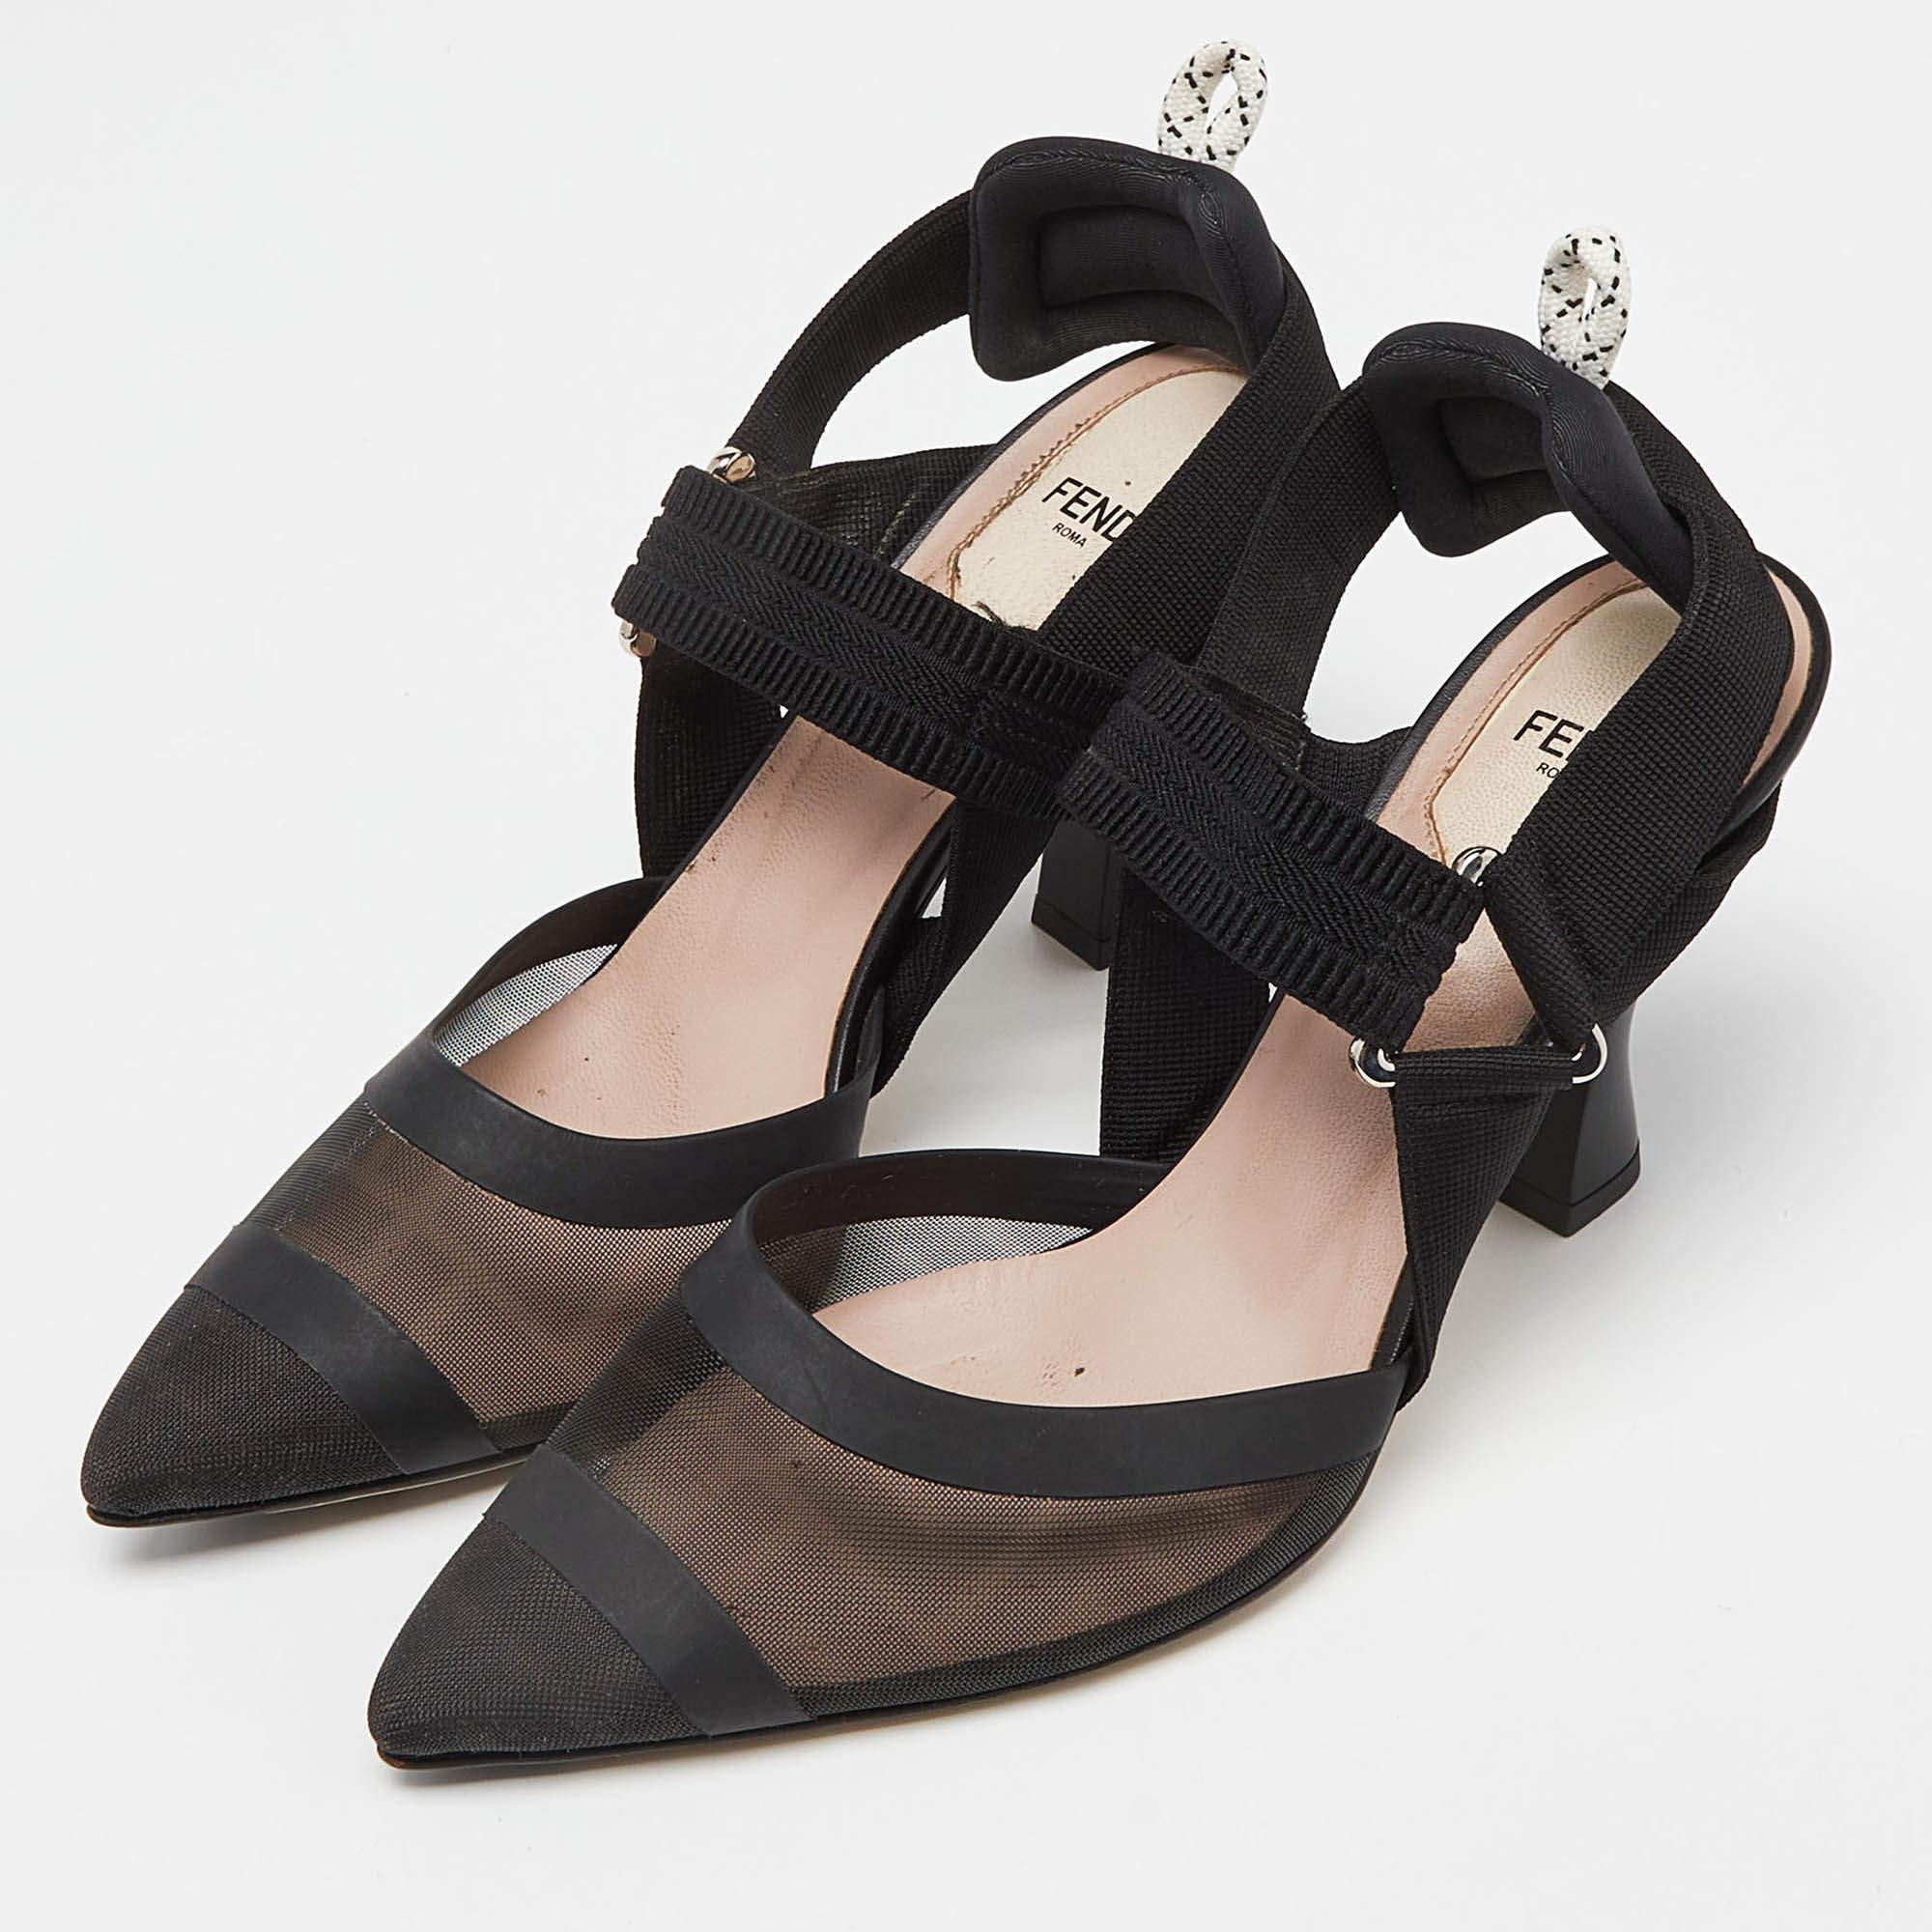 Make a statement with these Fendi slingback pumps for women. Impeccably crafted, these chic heels offer both fashion and comfort, elevating your look with each graceful step.

